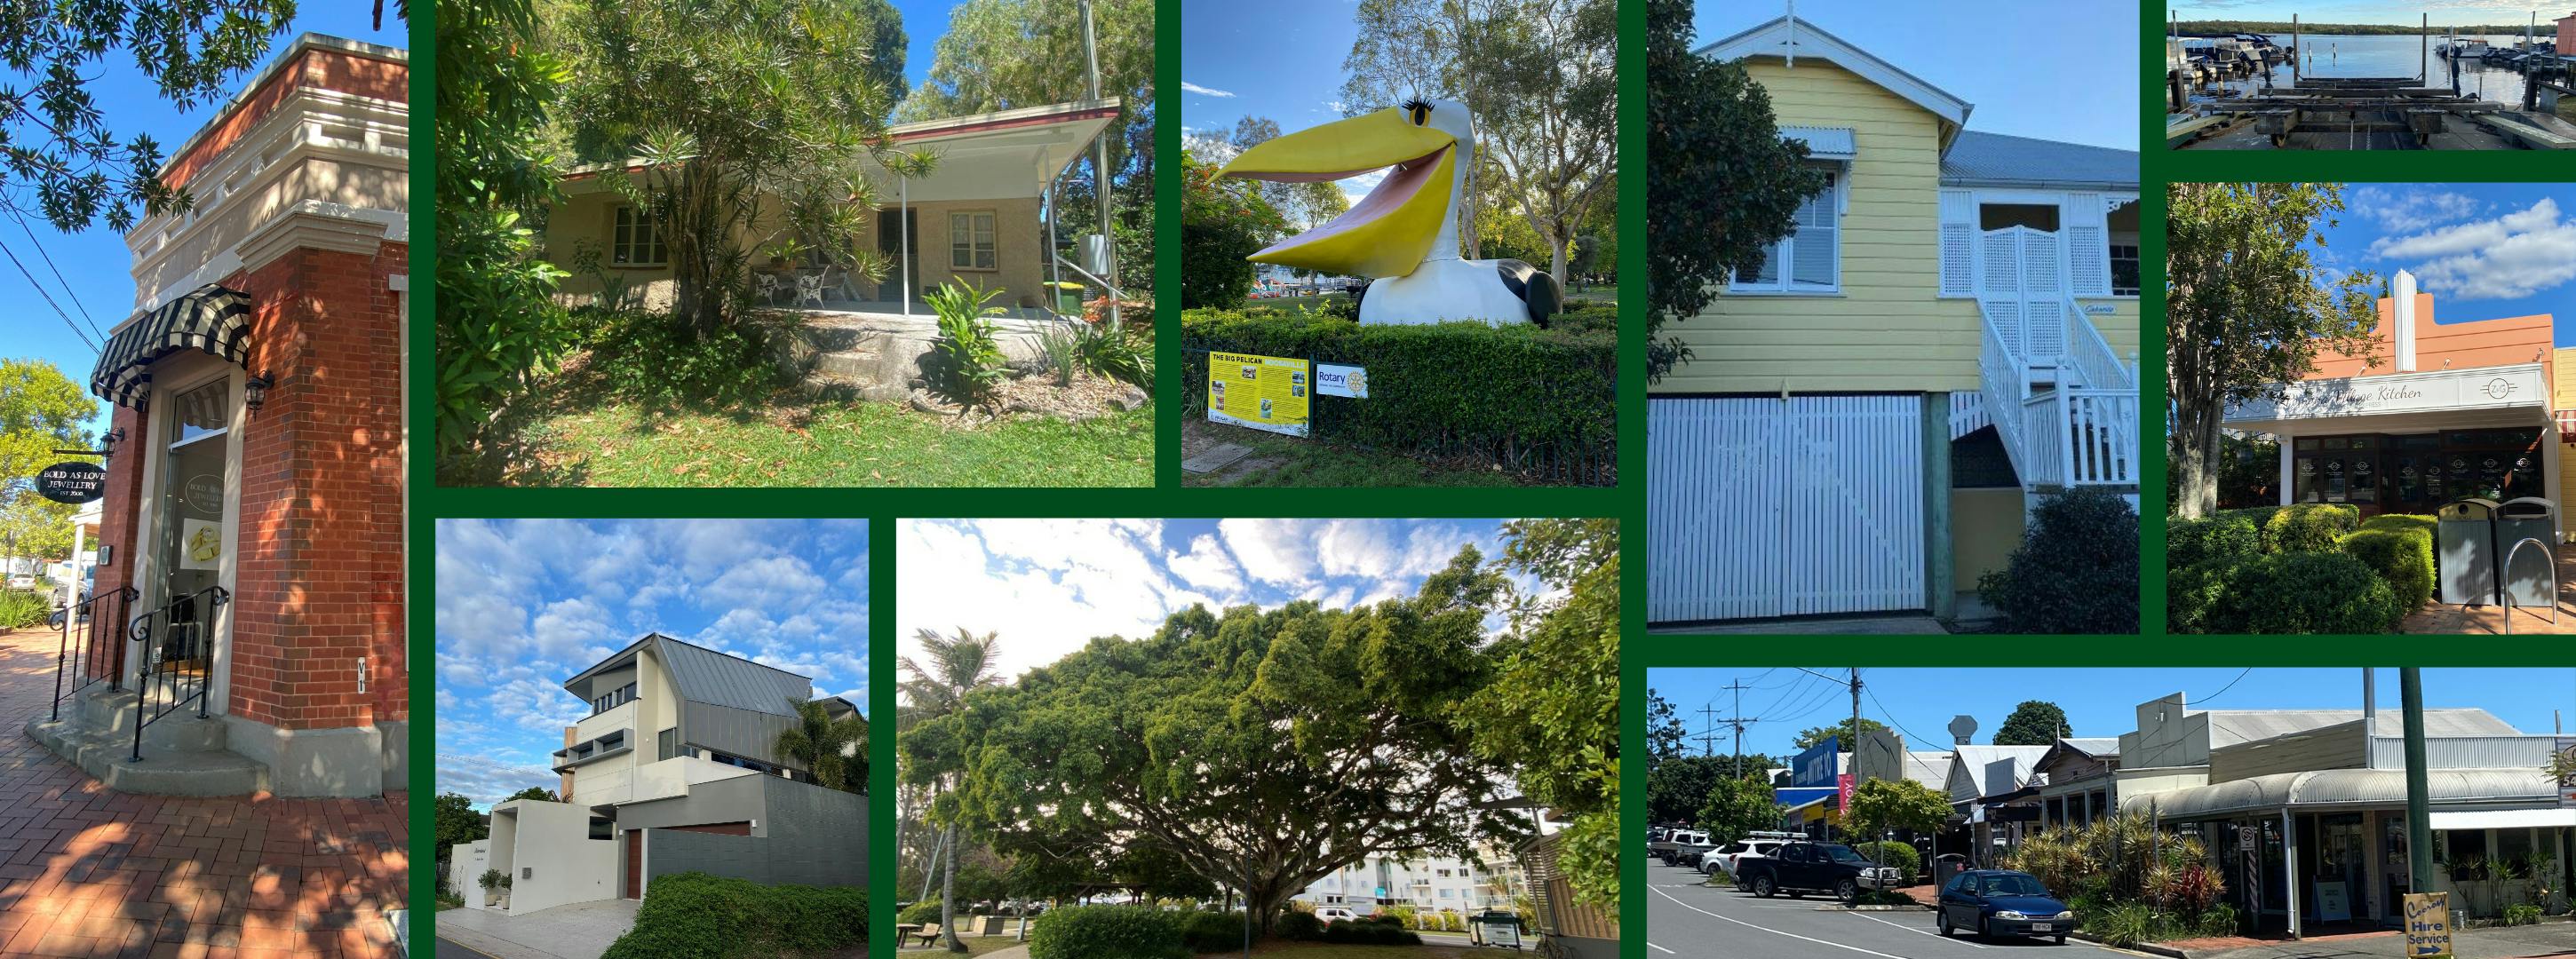 A collage of place images with houses of varied styles, shops, trees, jetties, streets and pelican Pete